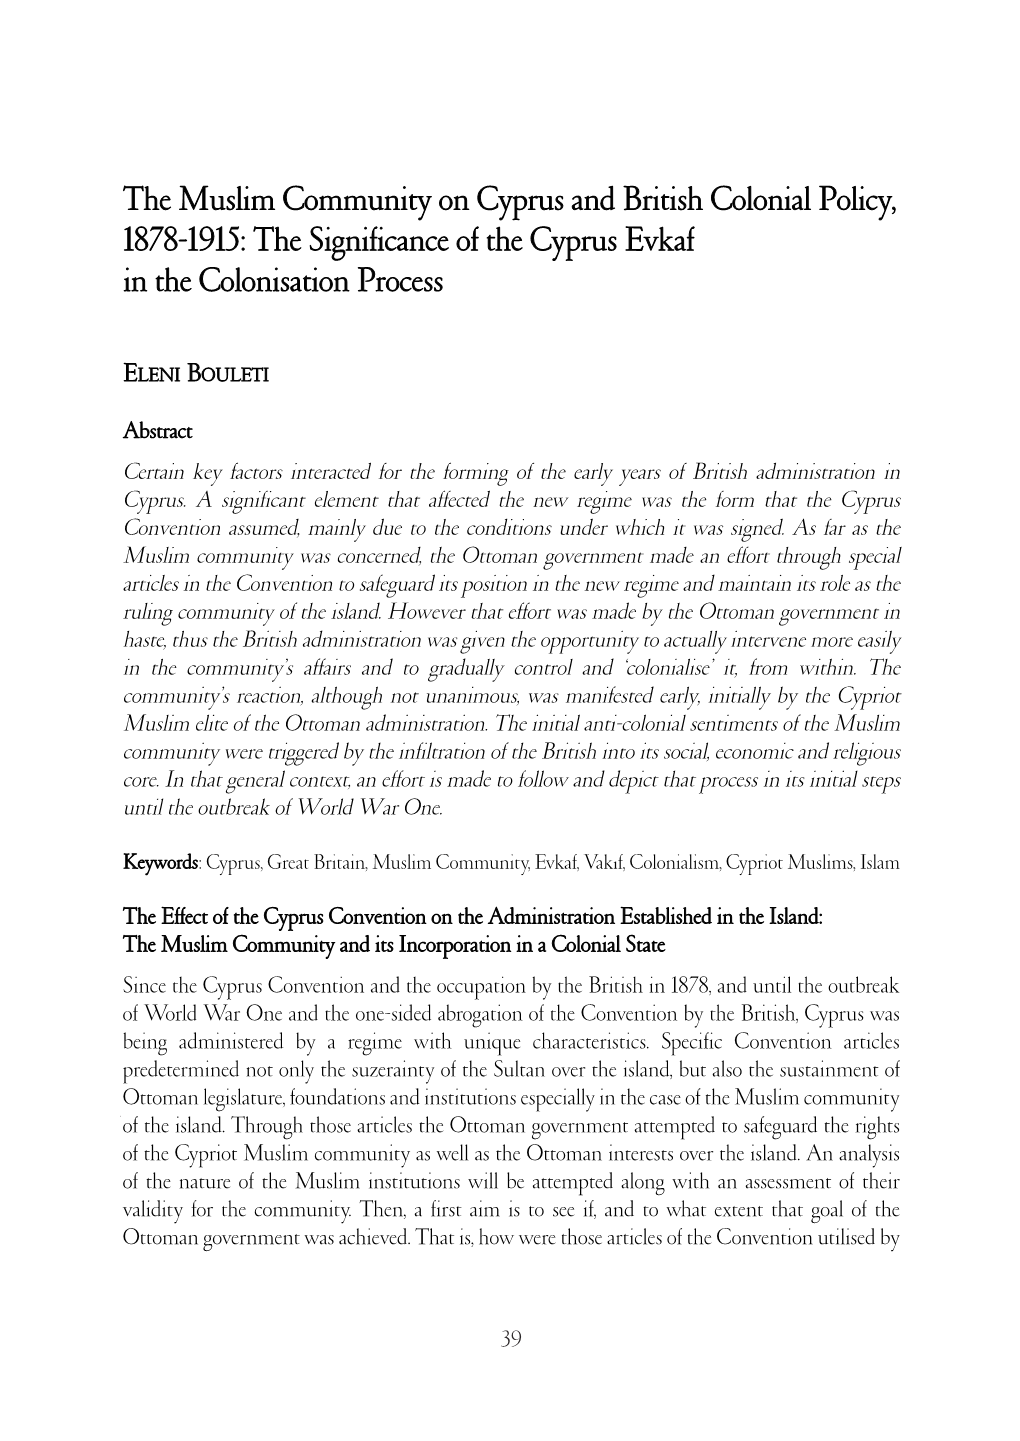 The Muslim Community on Cyprus and British Colonial Policy, 1878-1915: the Significance of the Cyprus Evkaf in the Colonisation Process